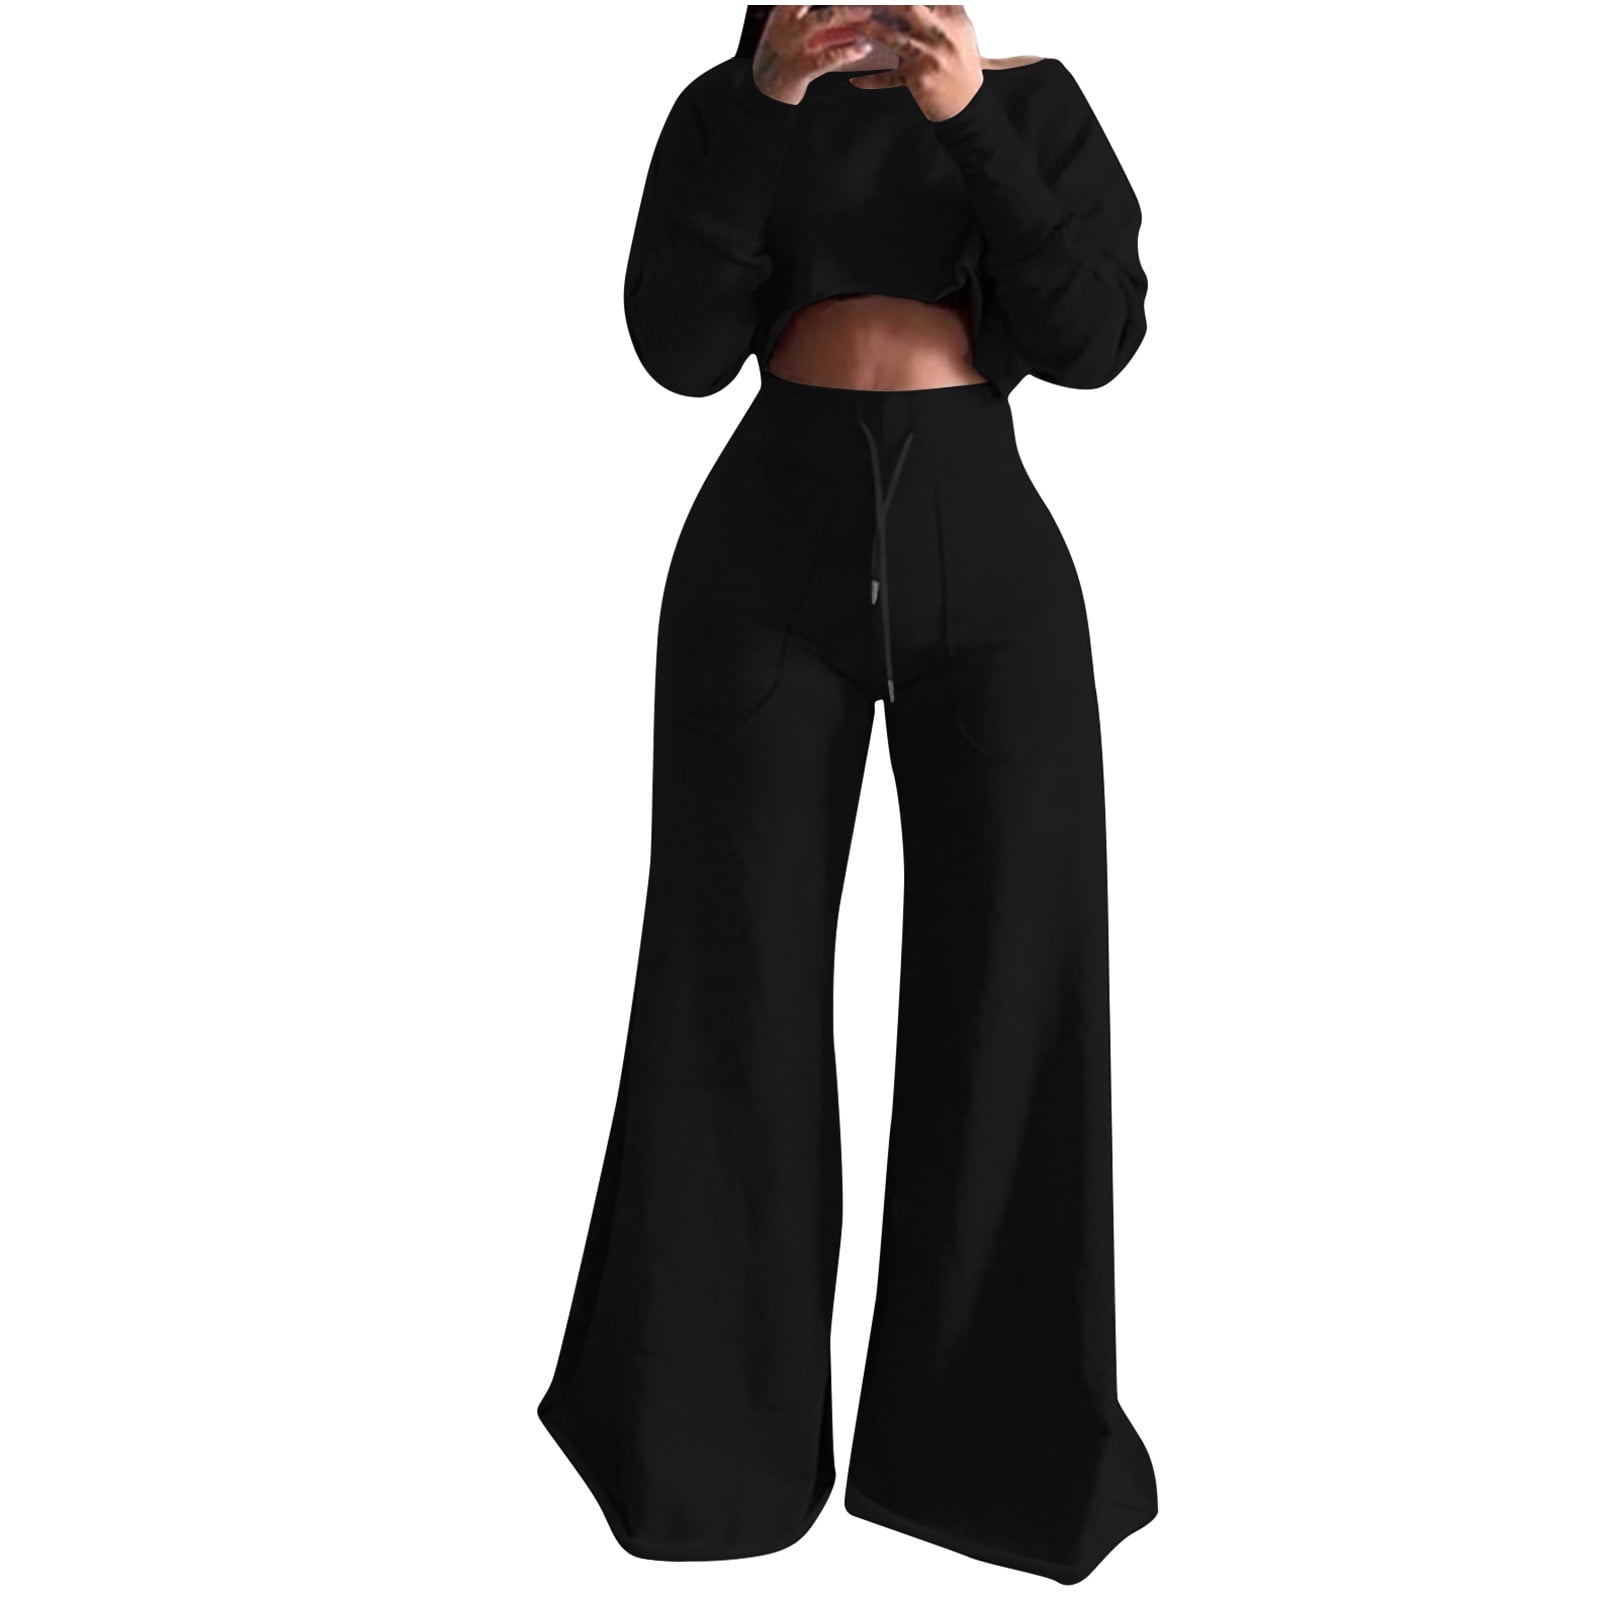 BLVB Women's 2 Piece Outfit Casual Crewneck Long Sleeve Cropped